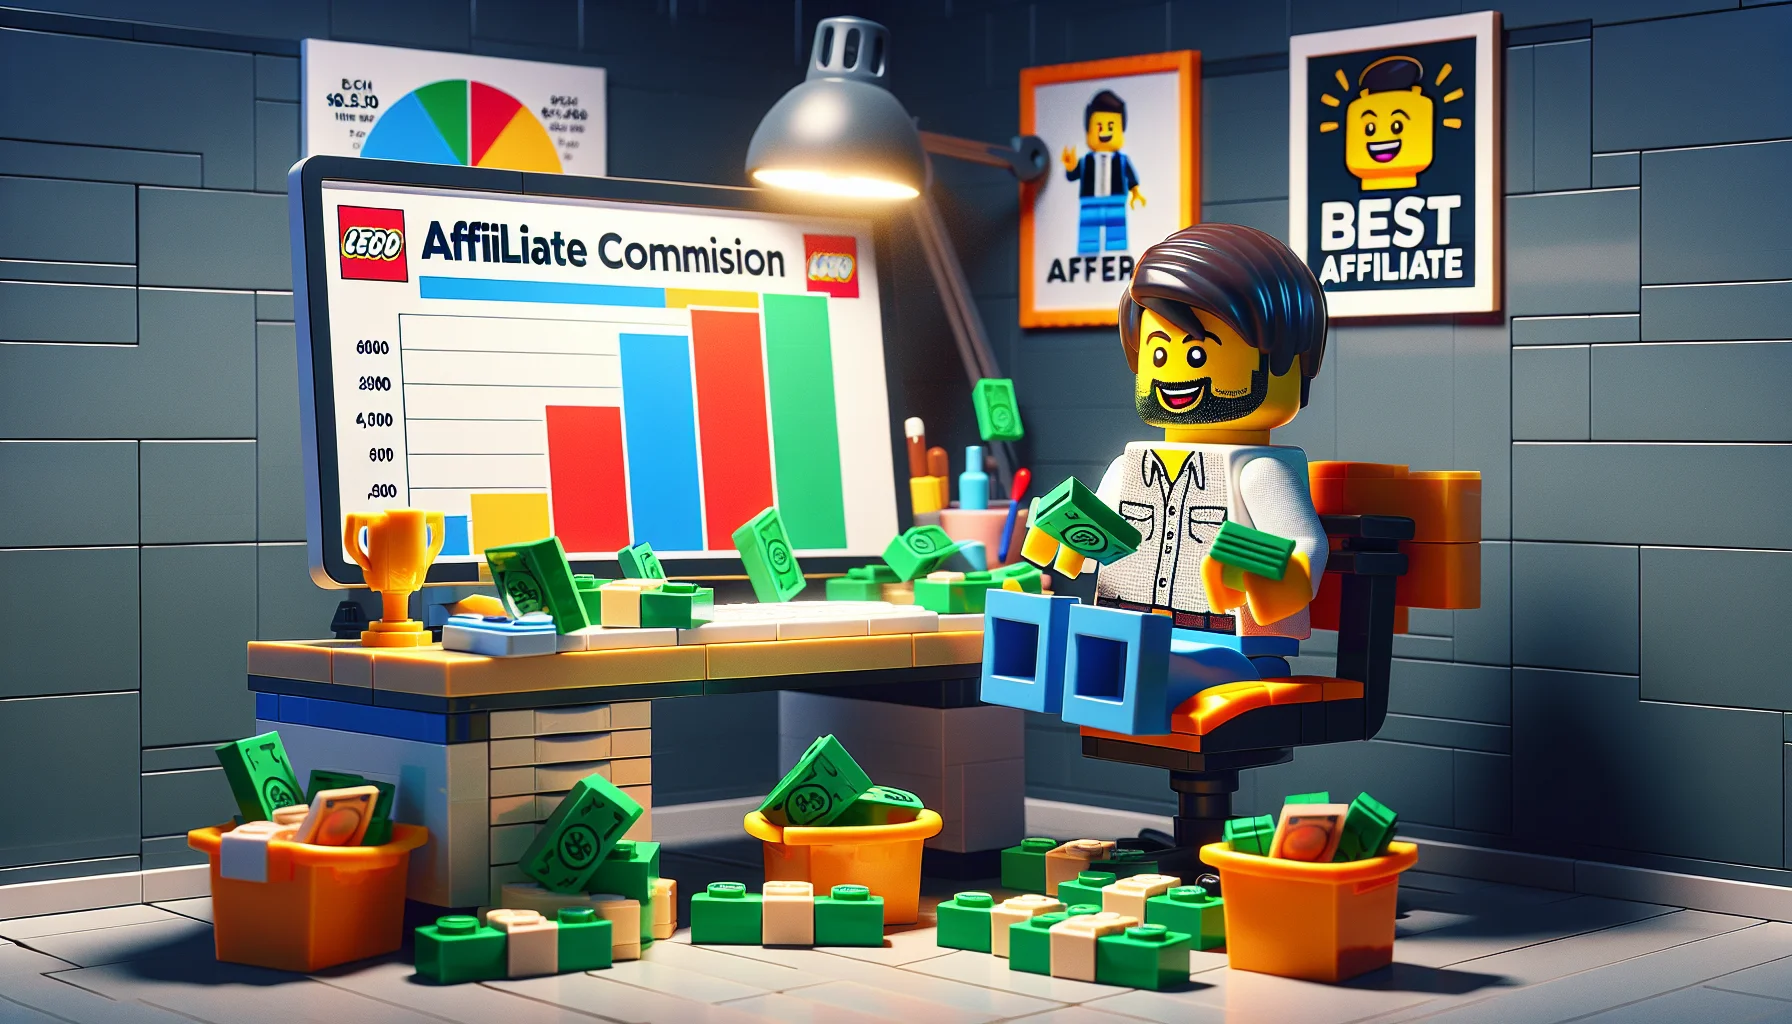 Create a humorous and realistic image embodying the concept of Lego affiliate commission. Picture a Lego character in a modern workspace, sitting at an ergonomic desk piled with Lego money. Visible on the computer screen should be a colorful bar chart with increasing revenue. Around the room, you can see motivational posters related to online earnings and a small Lego trophy for 'best affiliate'. Lighting should be adequate, symbolizing a promising work environment. Our Lego character can be Caucasian, sporting a neat beard and wearing a casual shirt, looking excited as he counts his earnings.